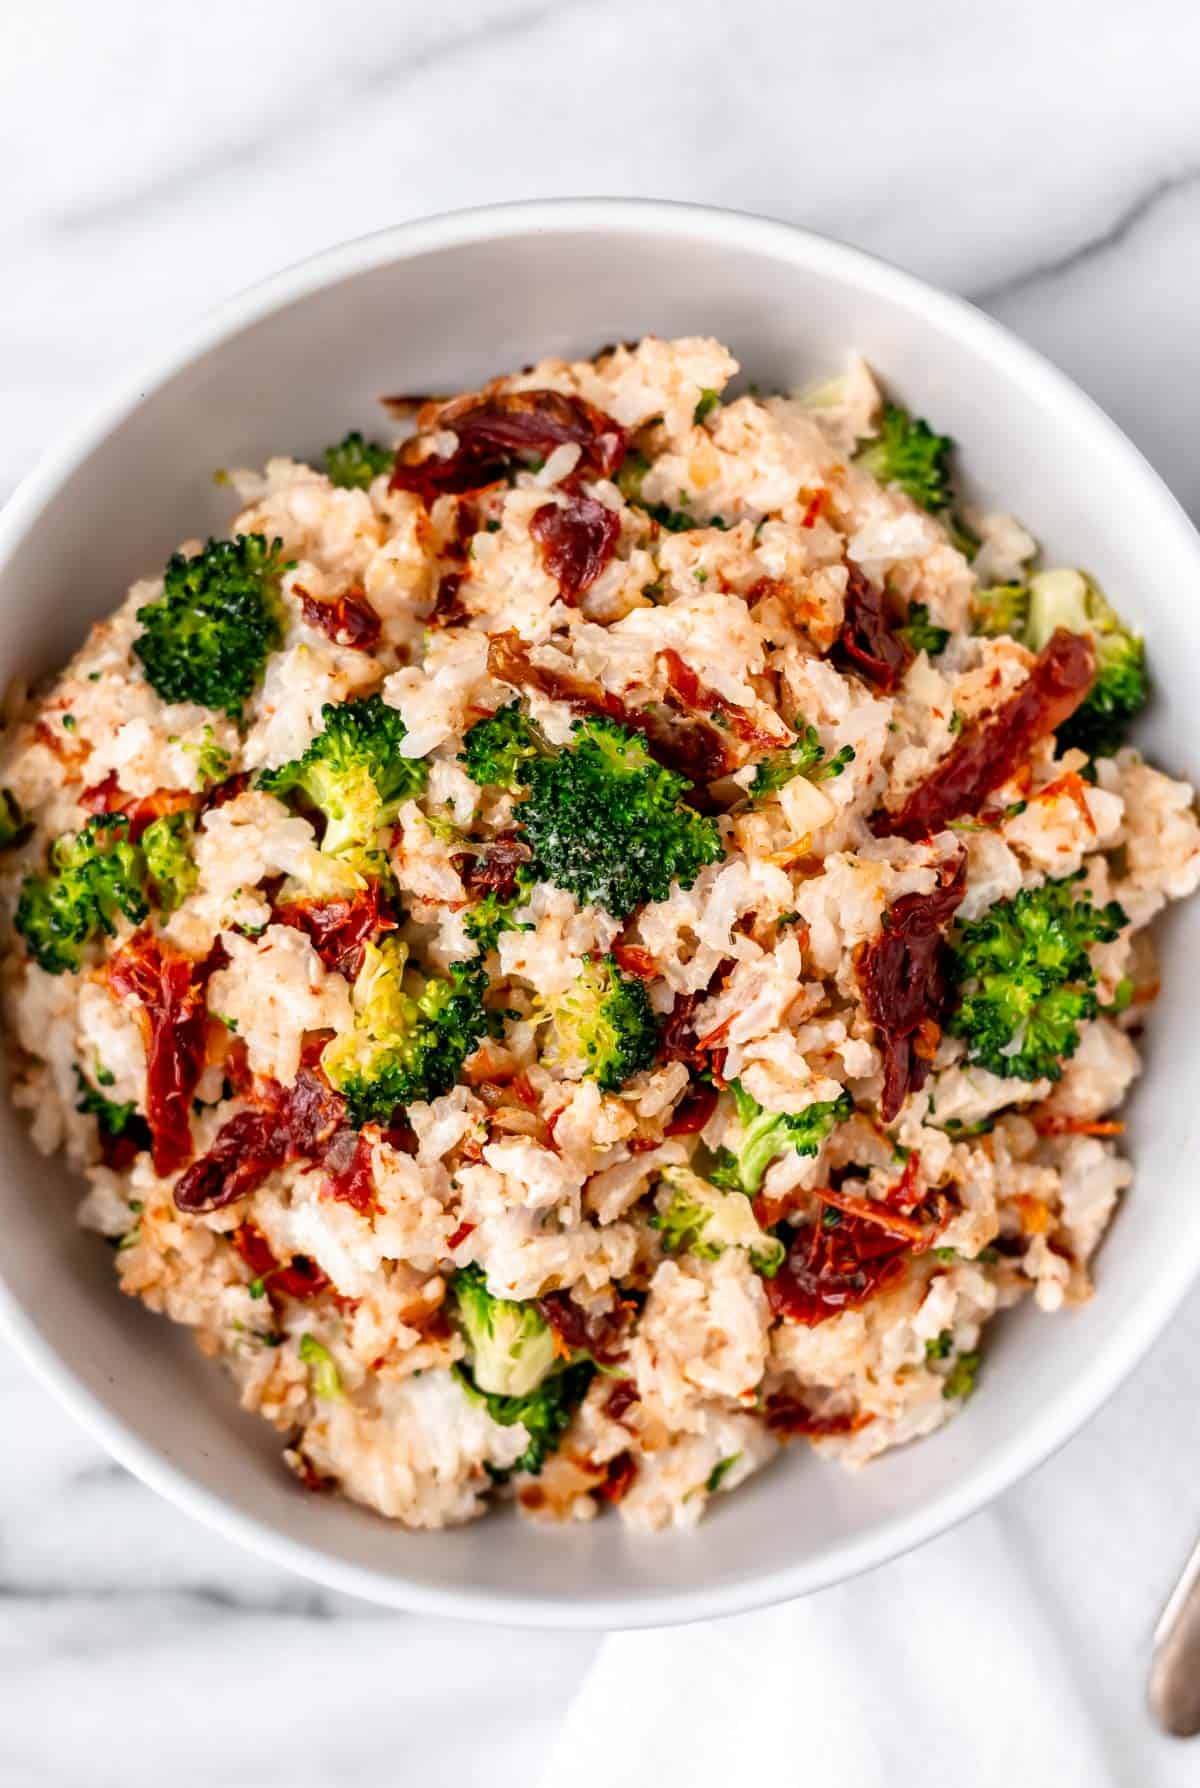 Overhead of a bowl of cream cheese rice with broccoli and sun-dried tomatoes.